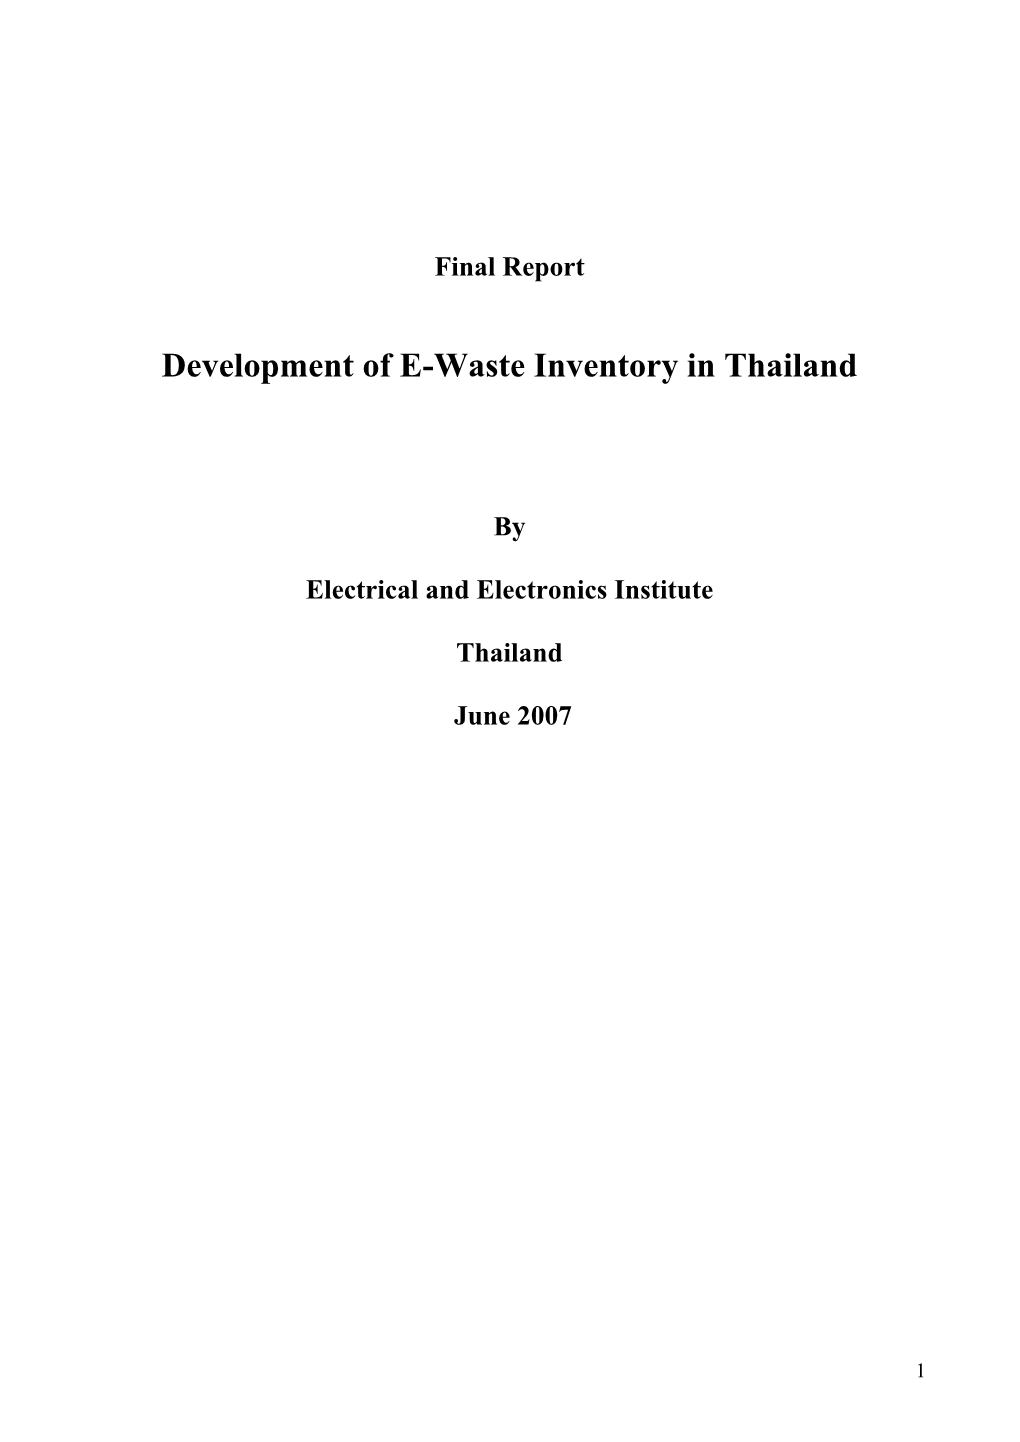 Development of E-Waste Inventory in Thailand: Final Report